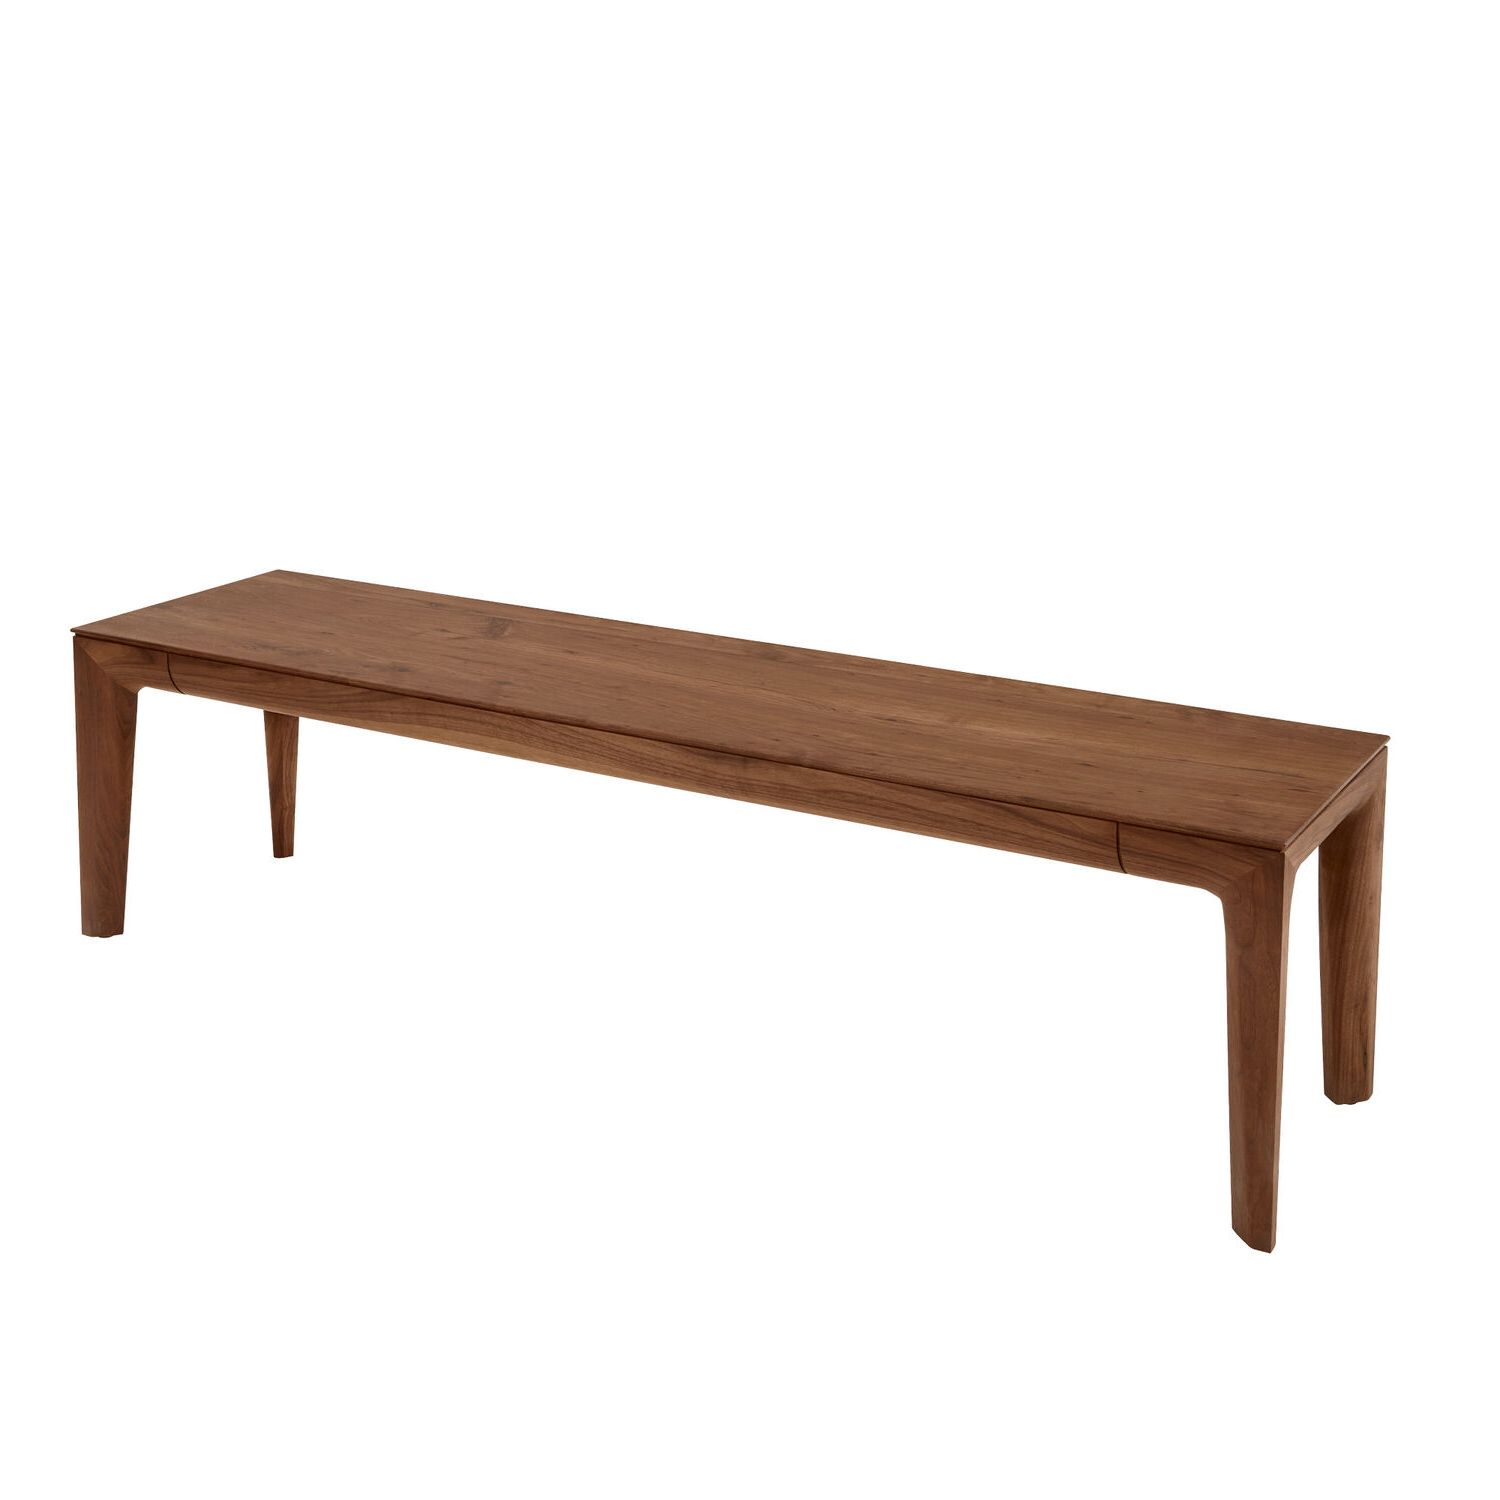 Famous Tavo Seat – Garpa Intended For Walnut Solid Wood Garden Benches (View 28 of 30)